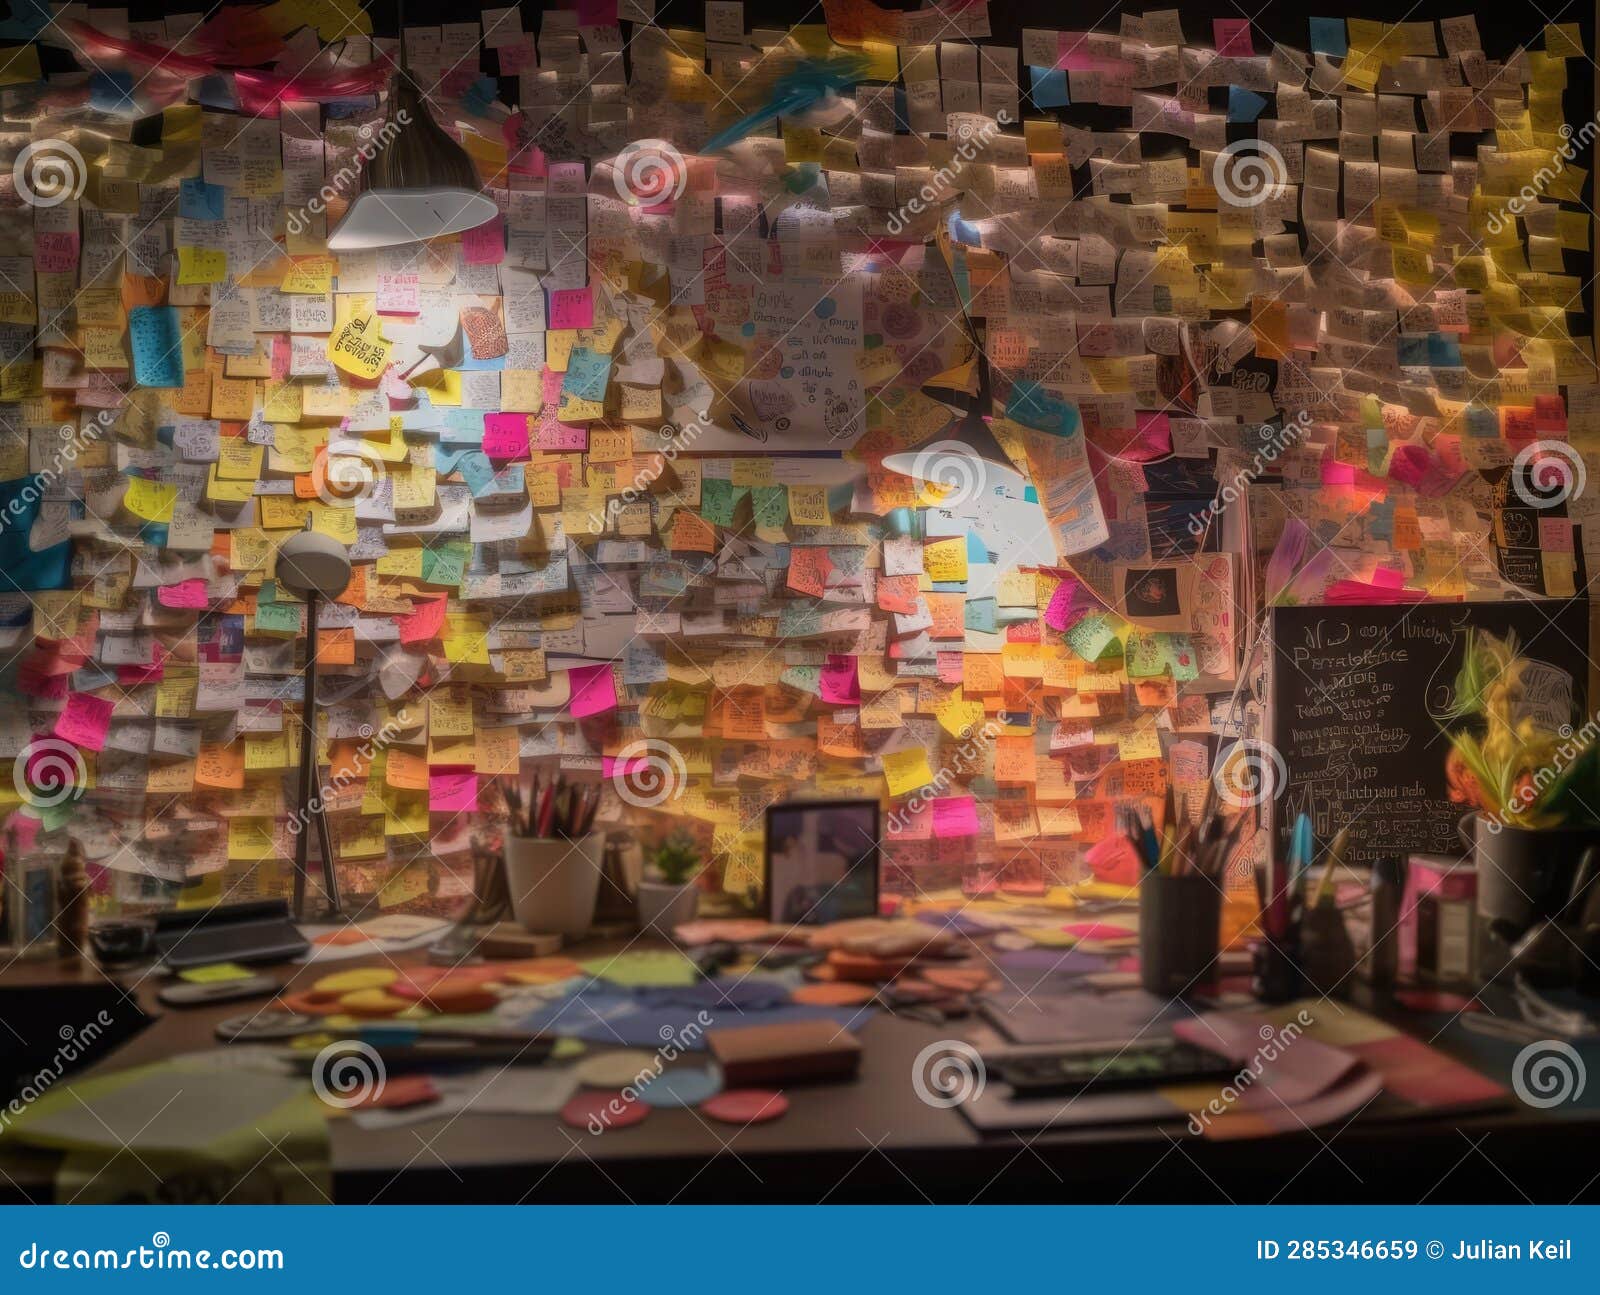 Creative Brainstorming Wall with Sticky Notes and Illustrations Stock ...